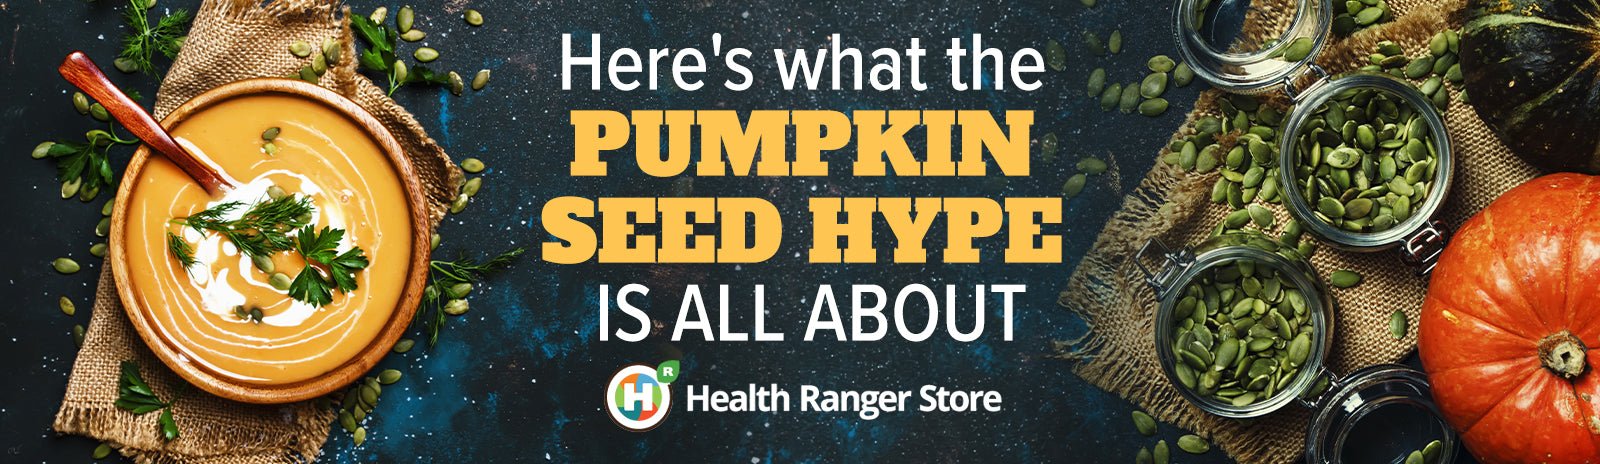 Here’s What the Pumpkin Seed Hype is All About